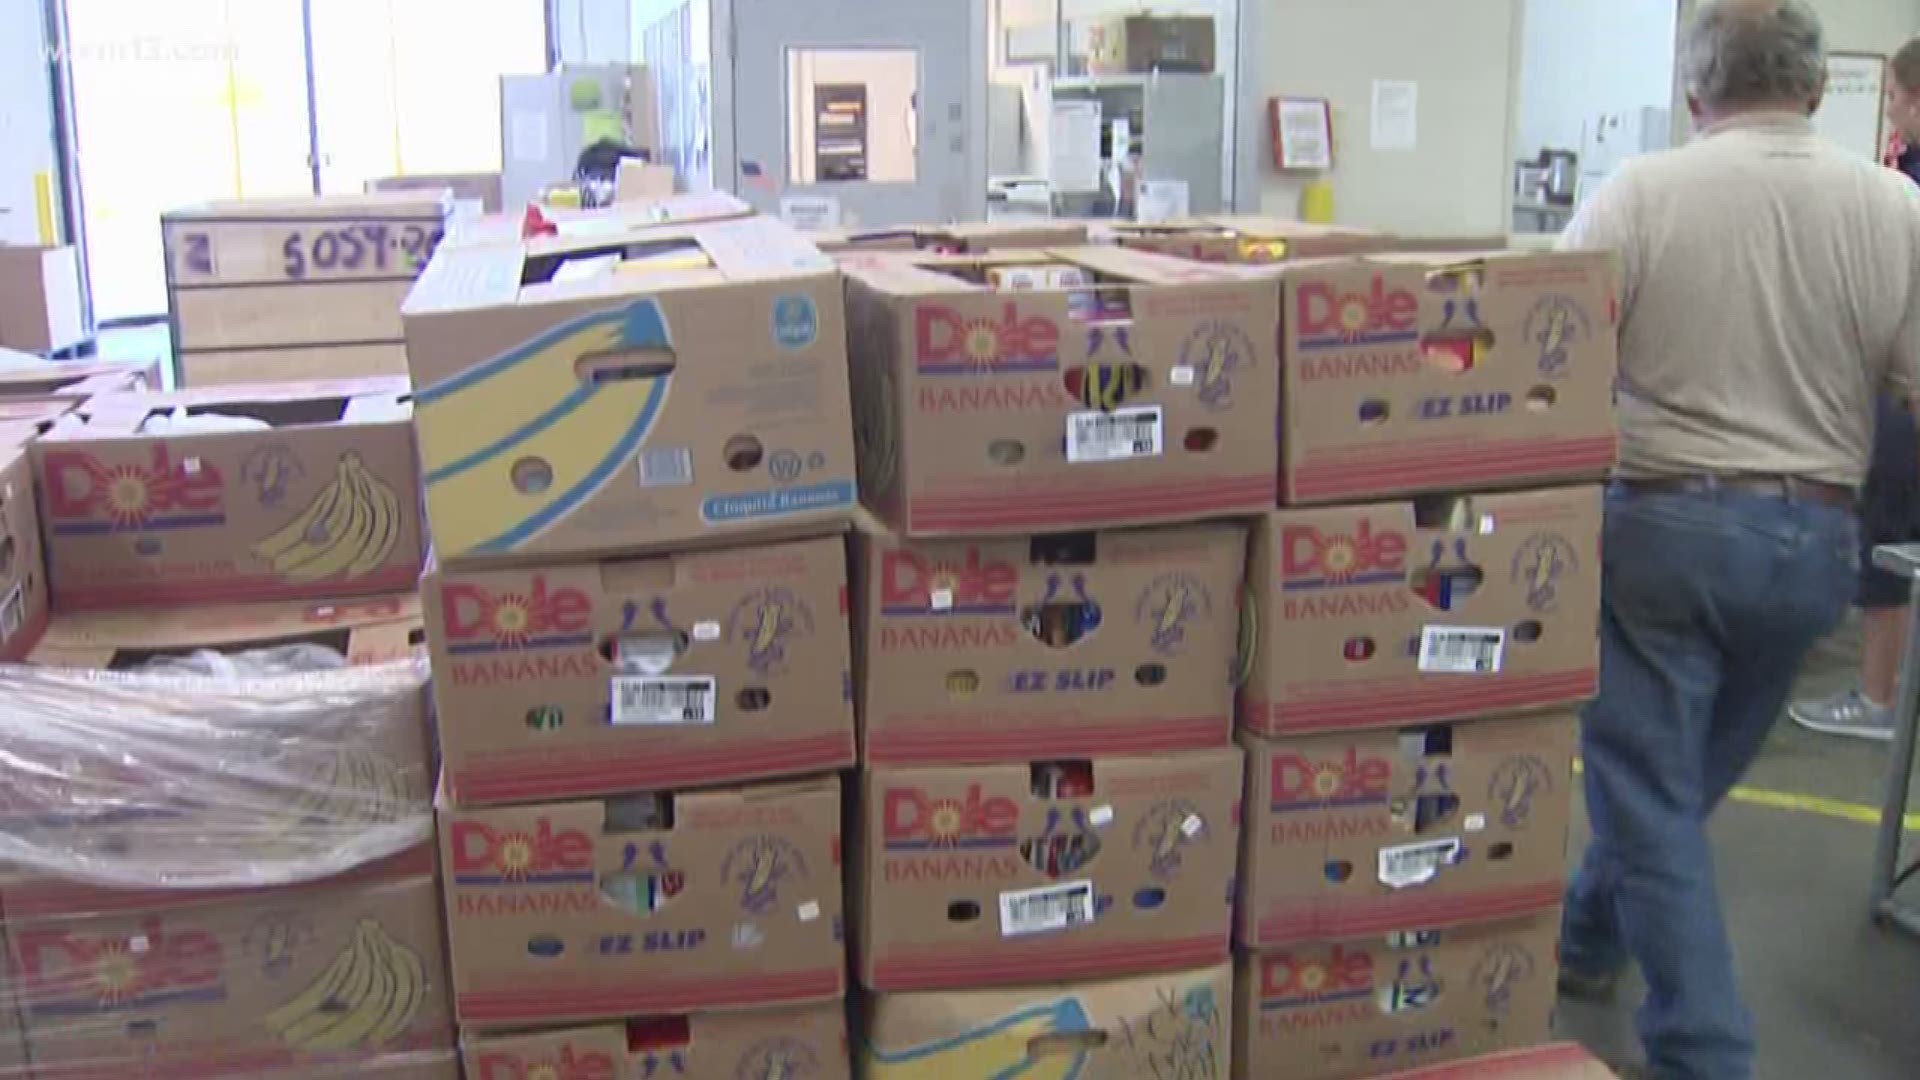 Kid's Food Basket helps feed thousands of kids each day